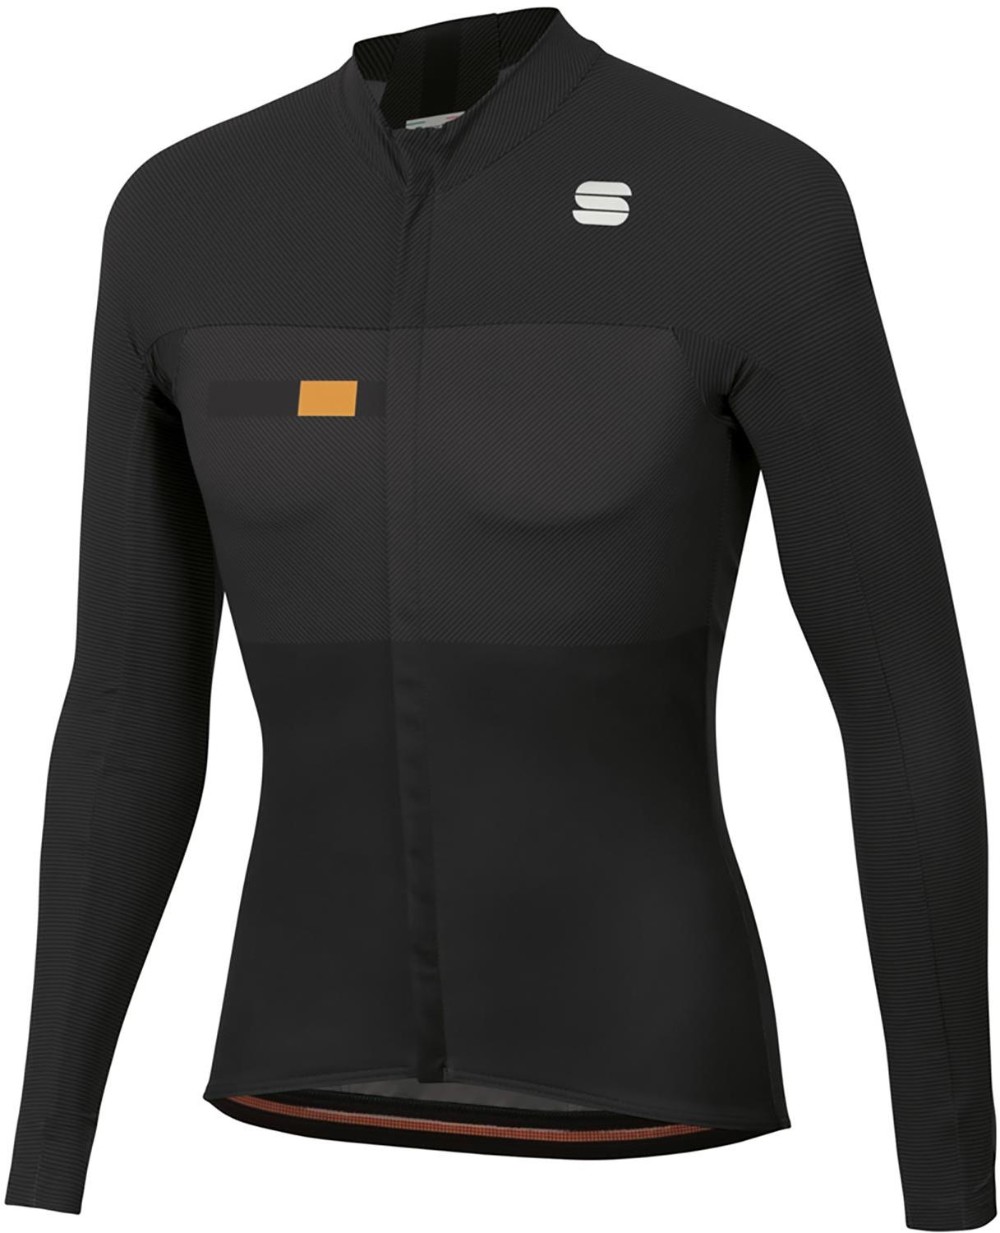 Bodyfit Pro Thermal Long Sleeve Cycling  Jersey image 0